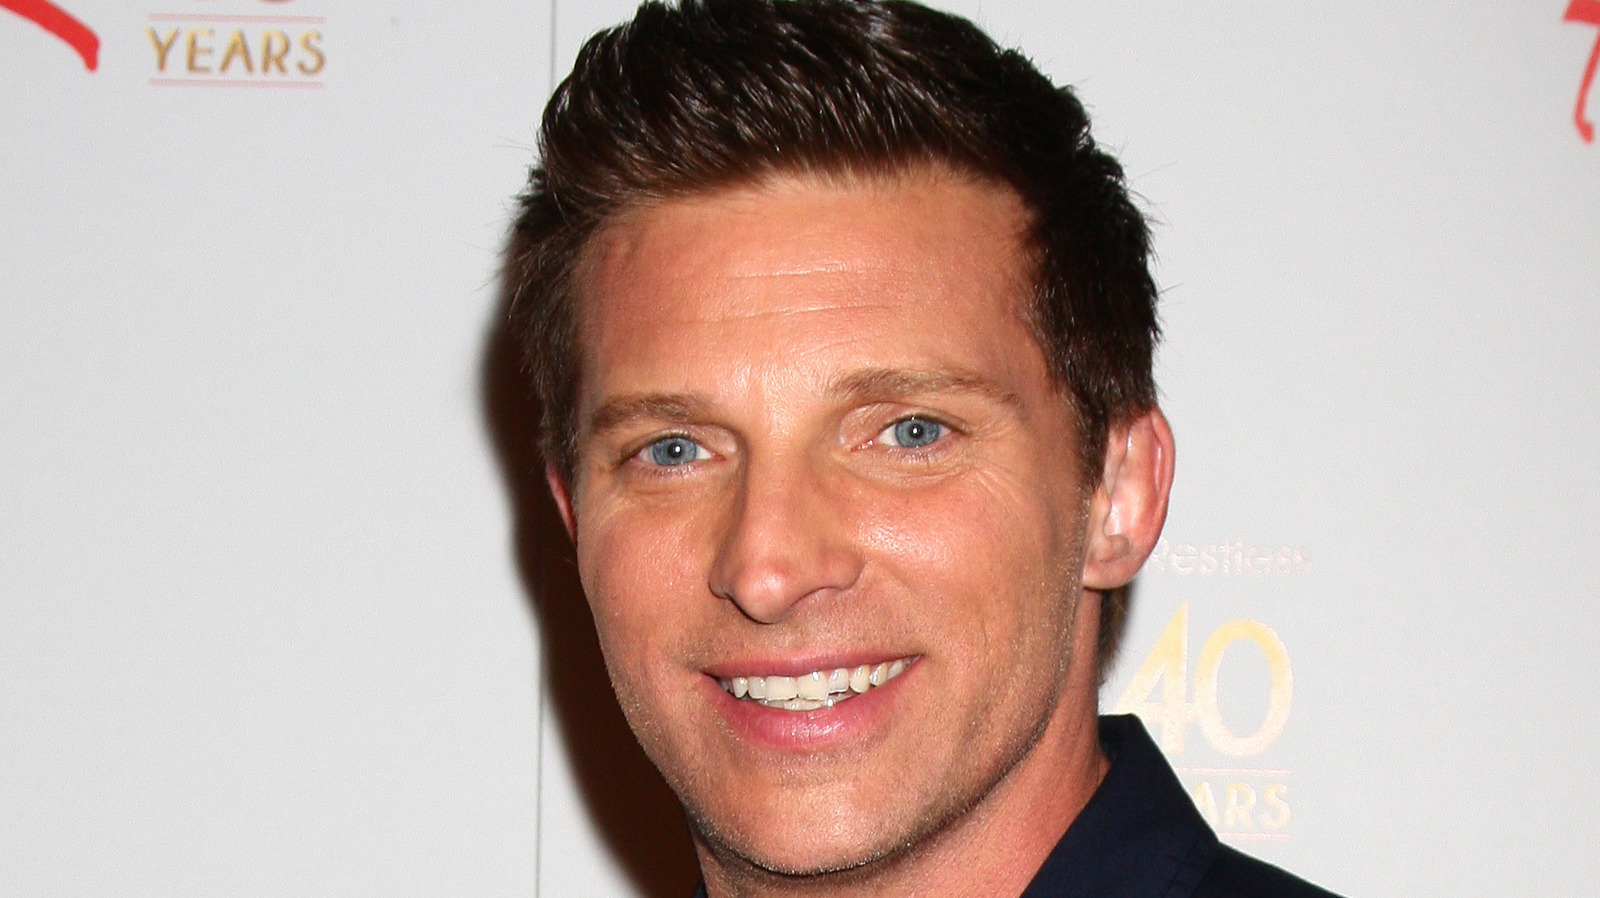 The 51-year old son of father Jack Burton and mother Tory Burton Steve Burton in 2022 photo. Steve Burton earned a  million dollar salary - leaving the net worth at  million in 2022